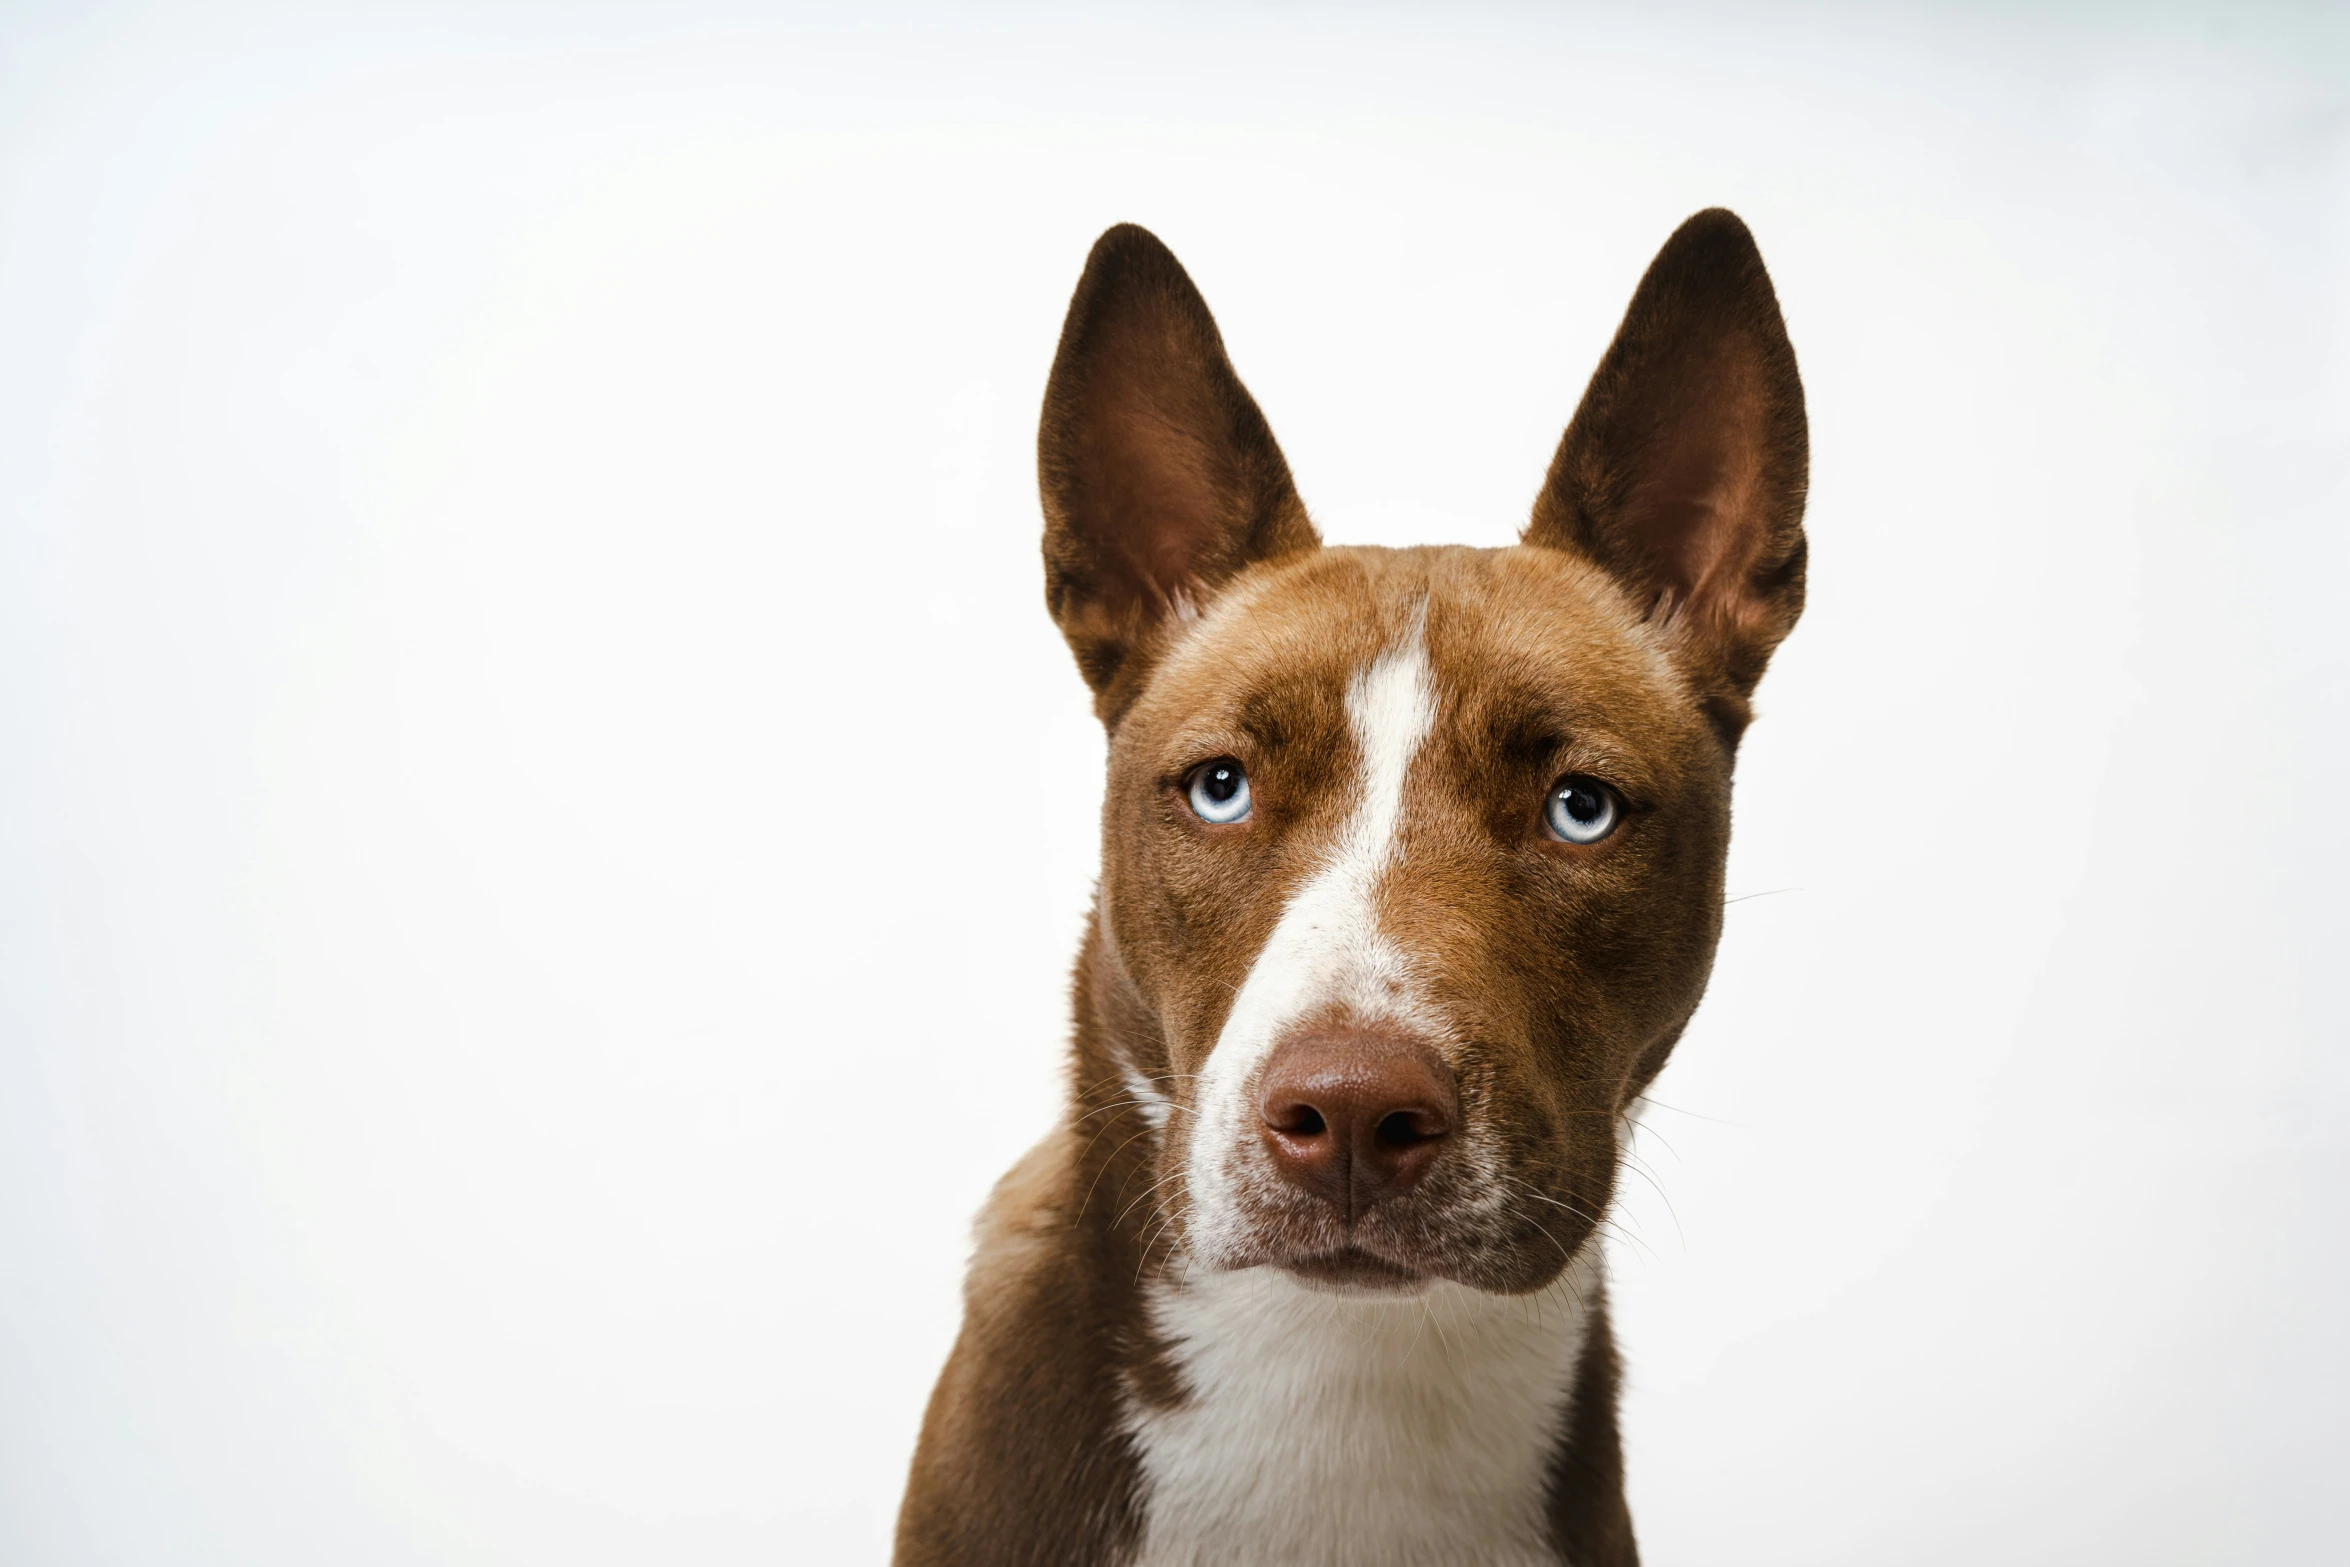 the close up image of a dog with an alert look